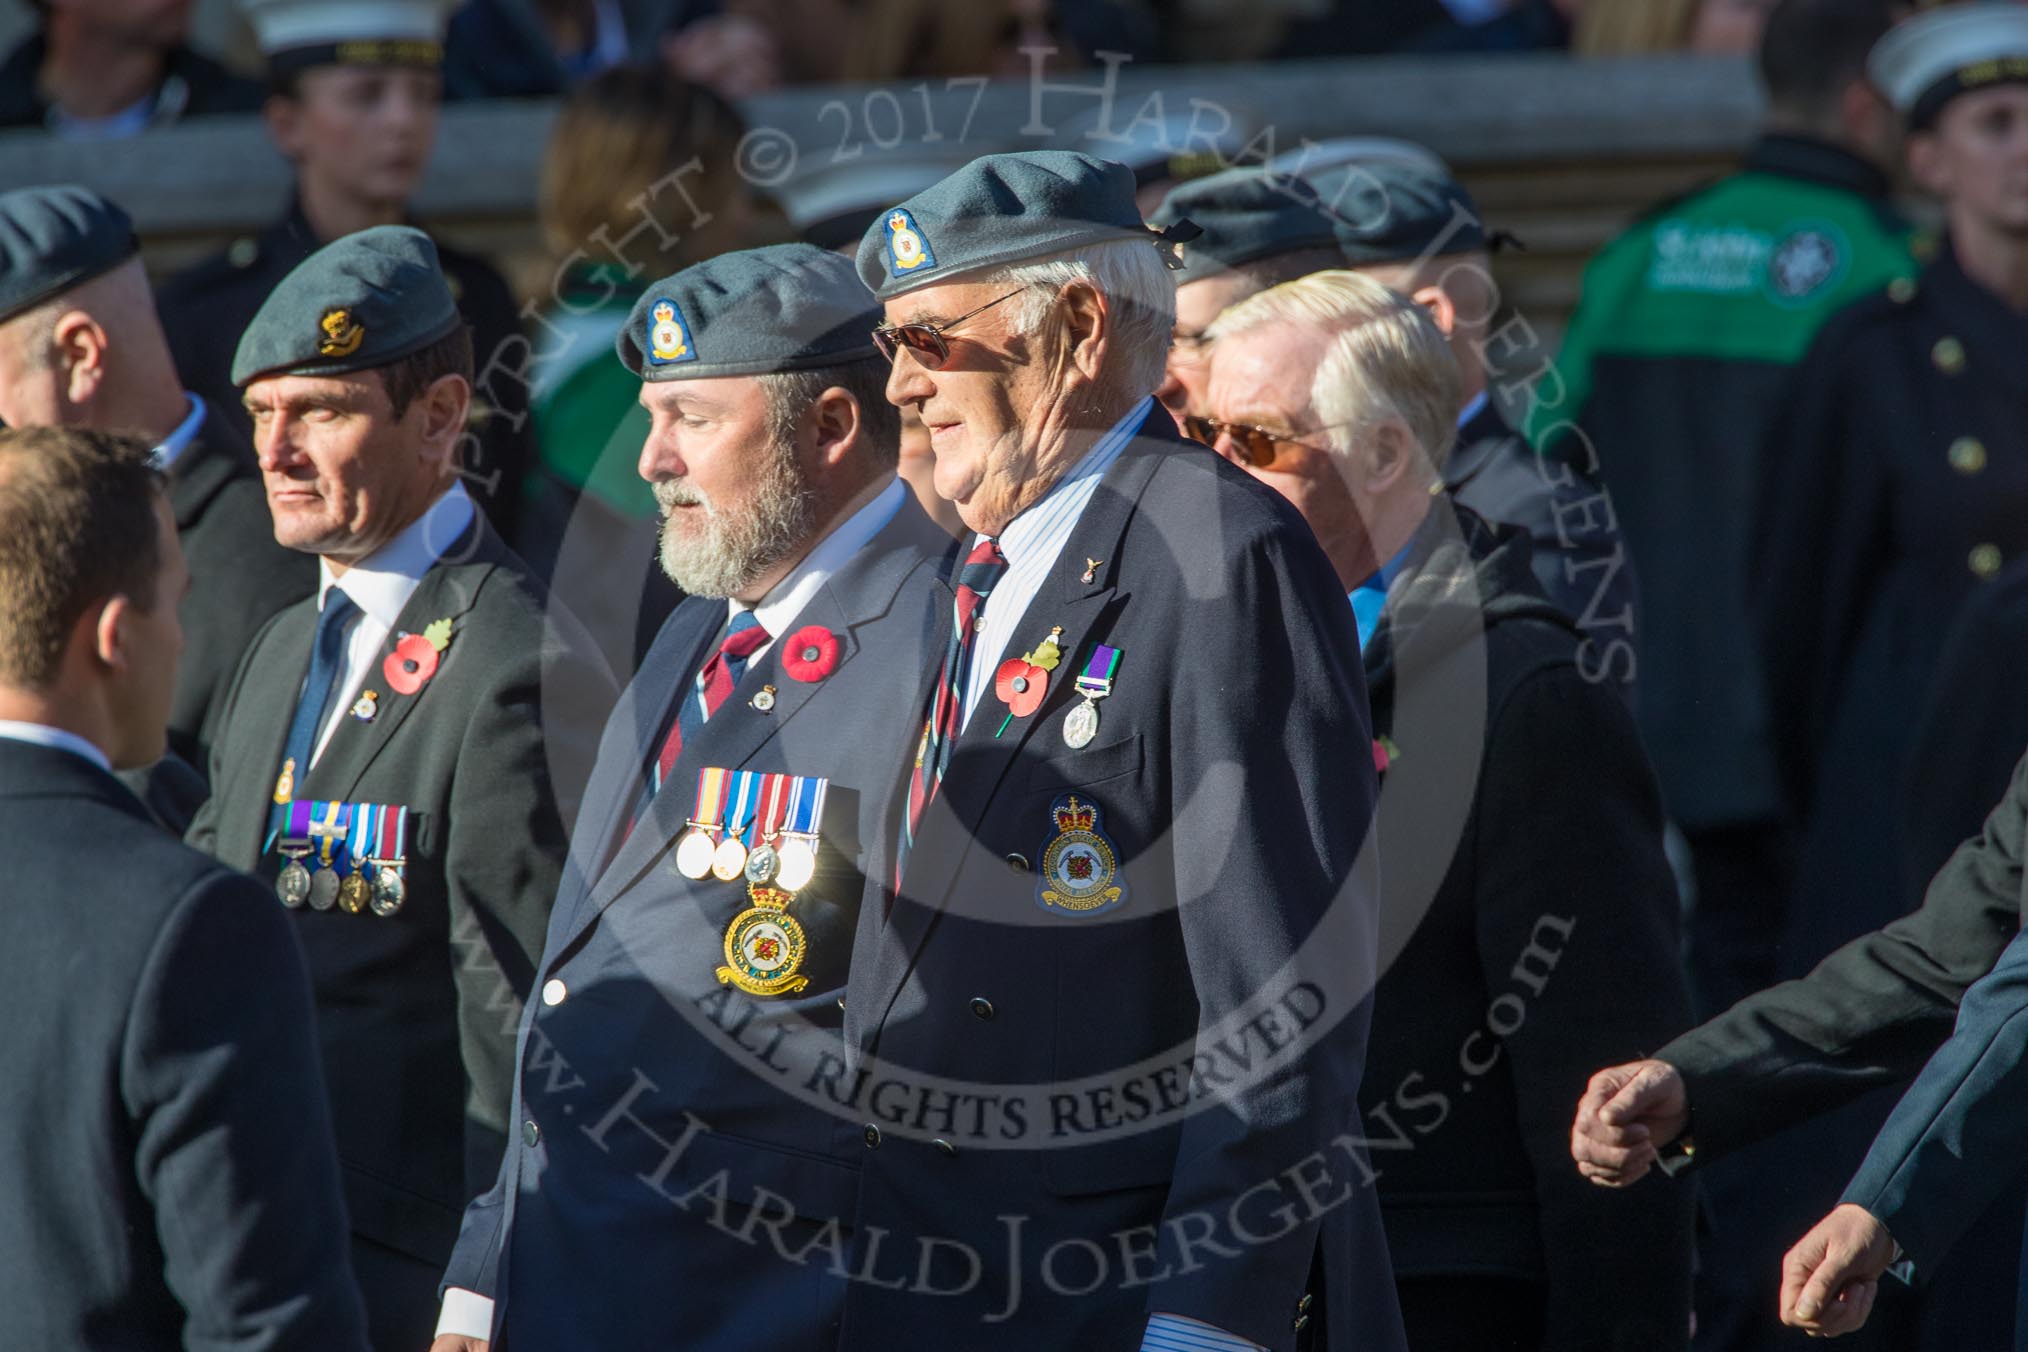 Royal Air Force Mountain Rescue Association (Group C12, 32 members) during the Royal British Legion March Past on Remembrance Sunday at the Cenotaph, Whitehall, Westminster, London, 11 November 2018, 12:16.